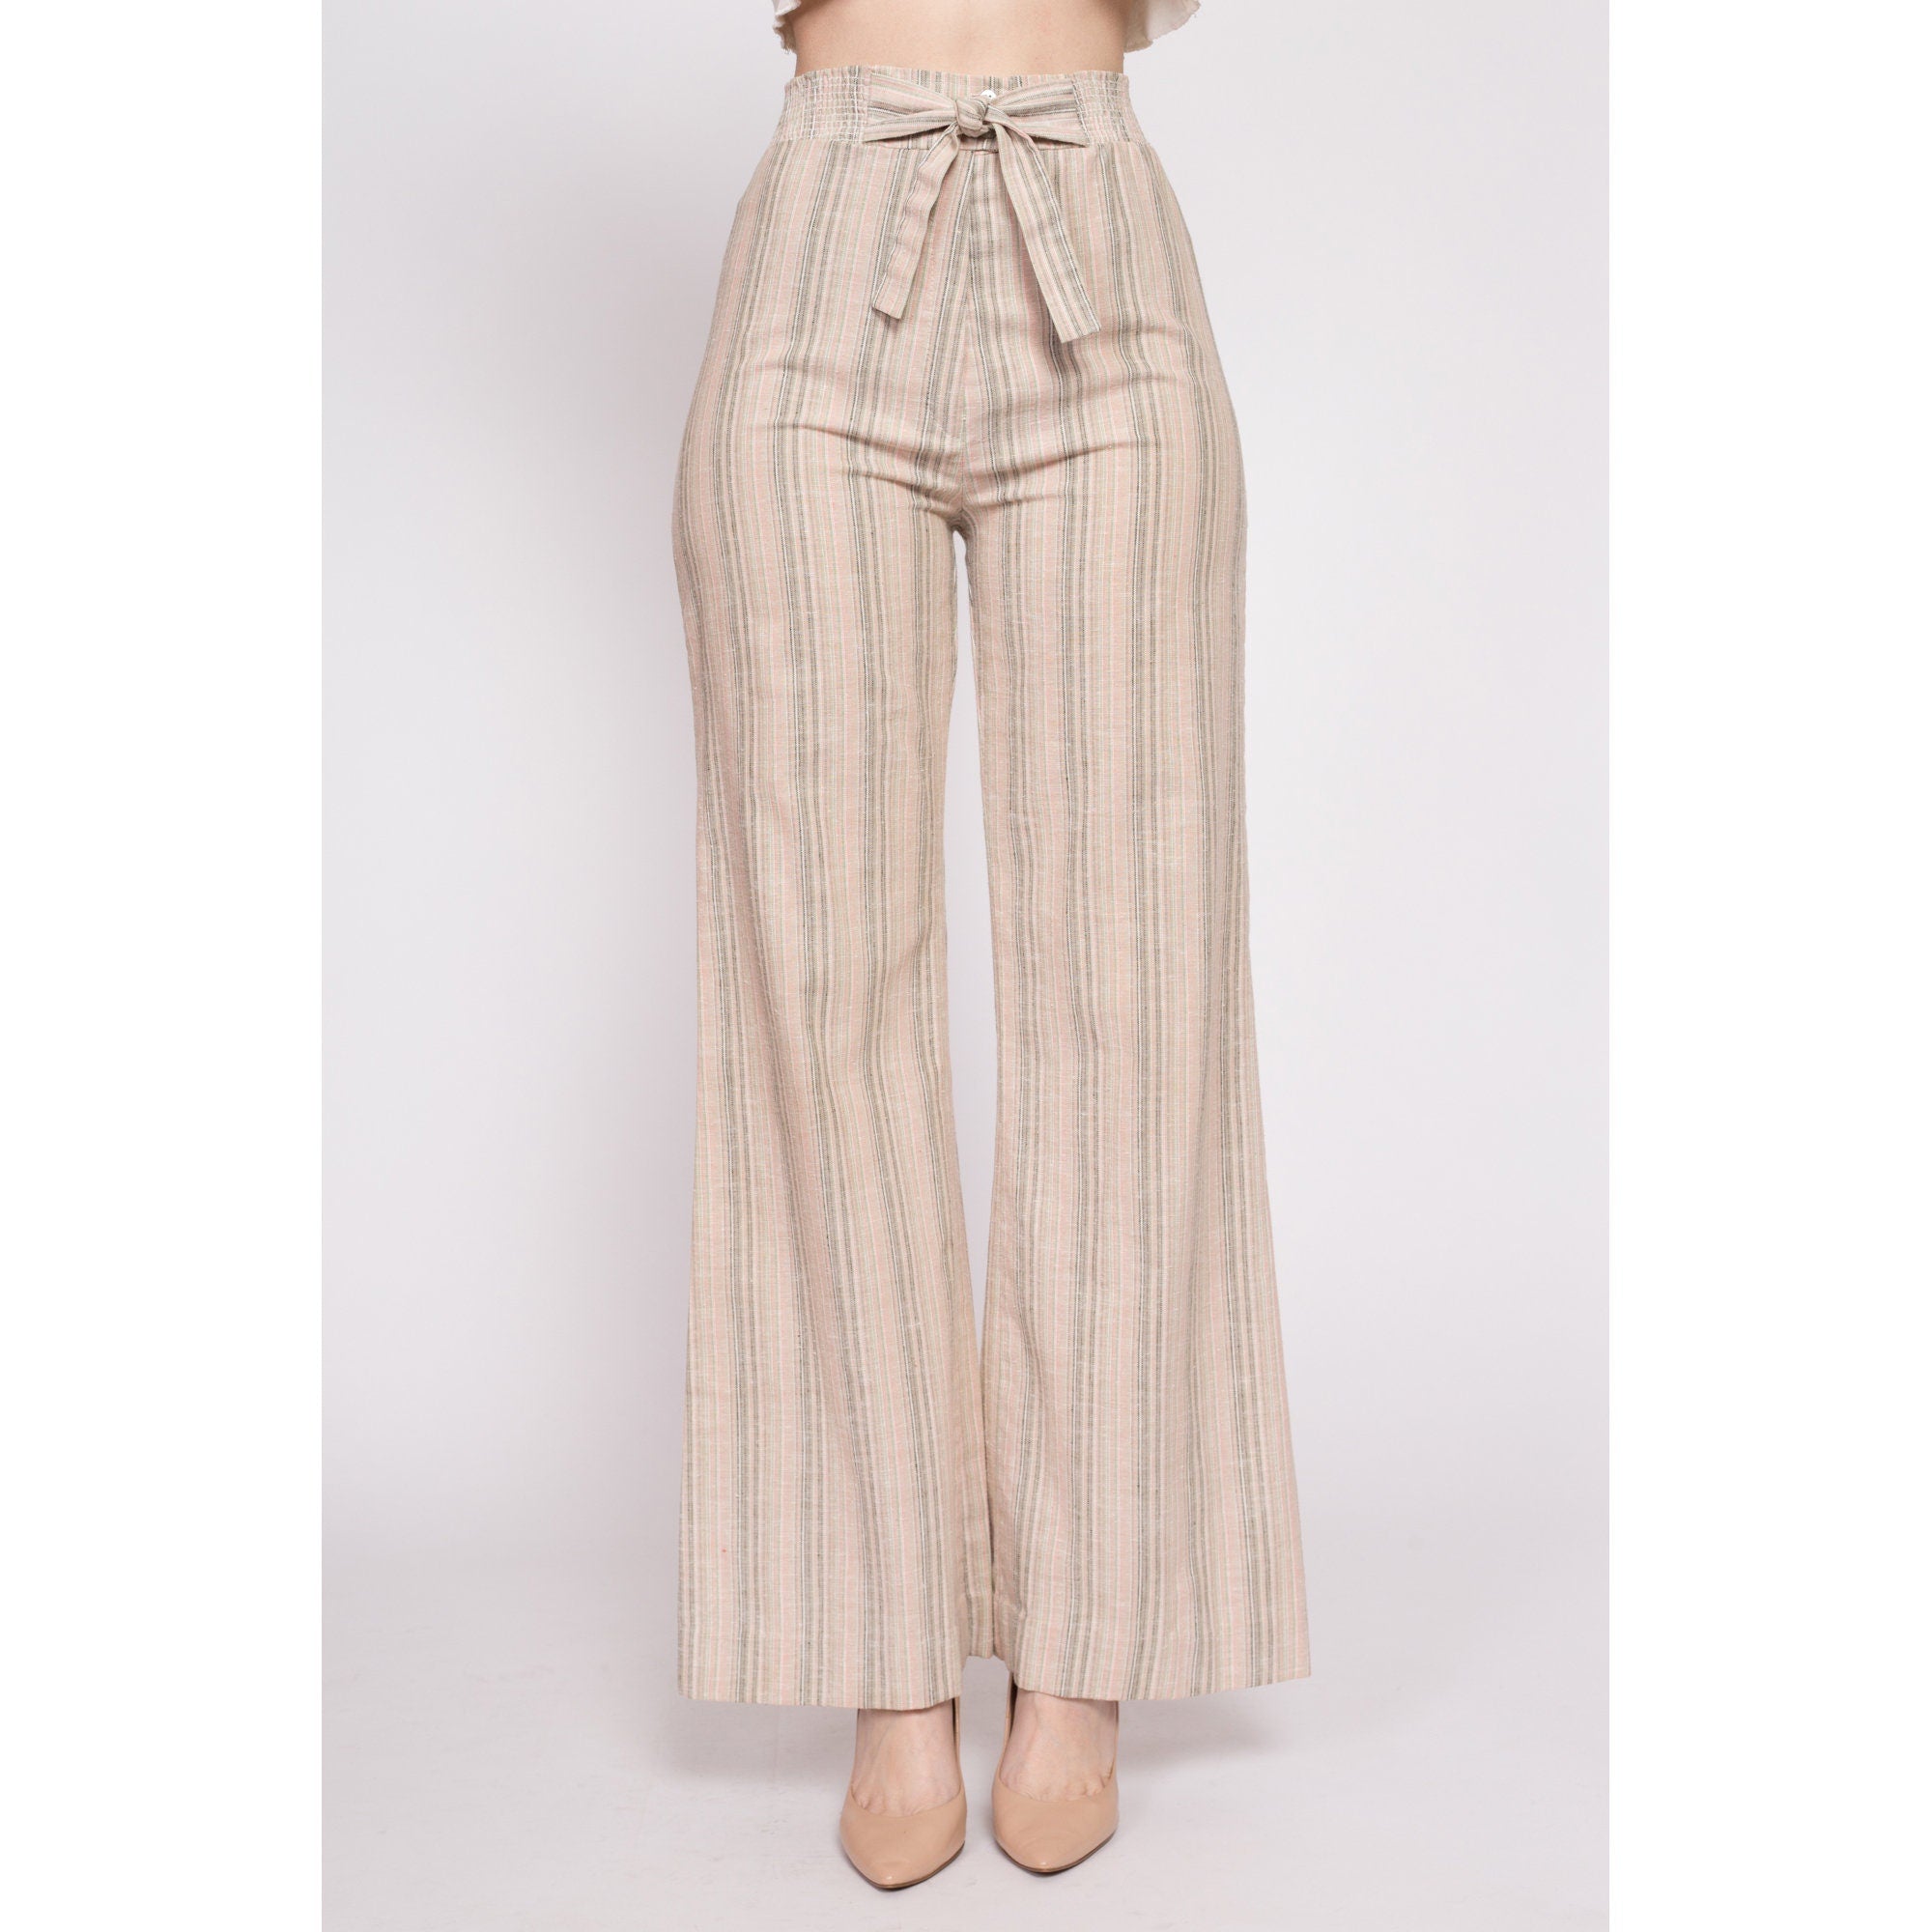 70s Striped High Waisted Flared Pants - XS to Small – Flying Apple